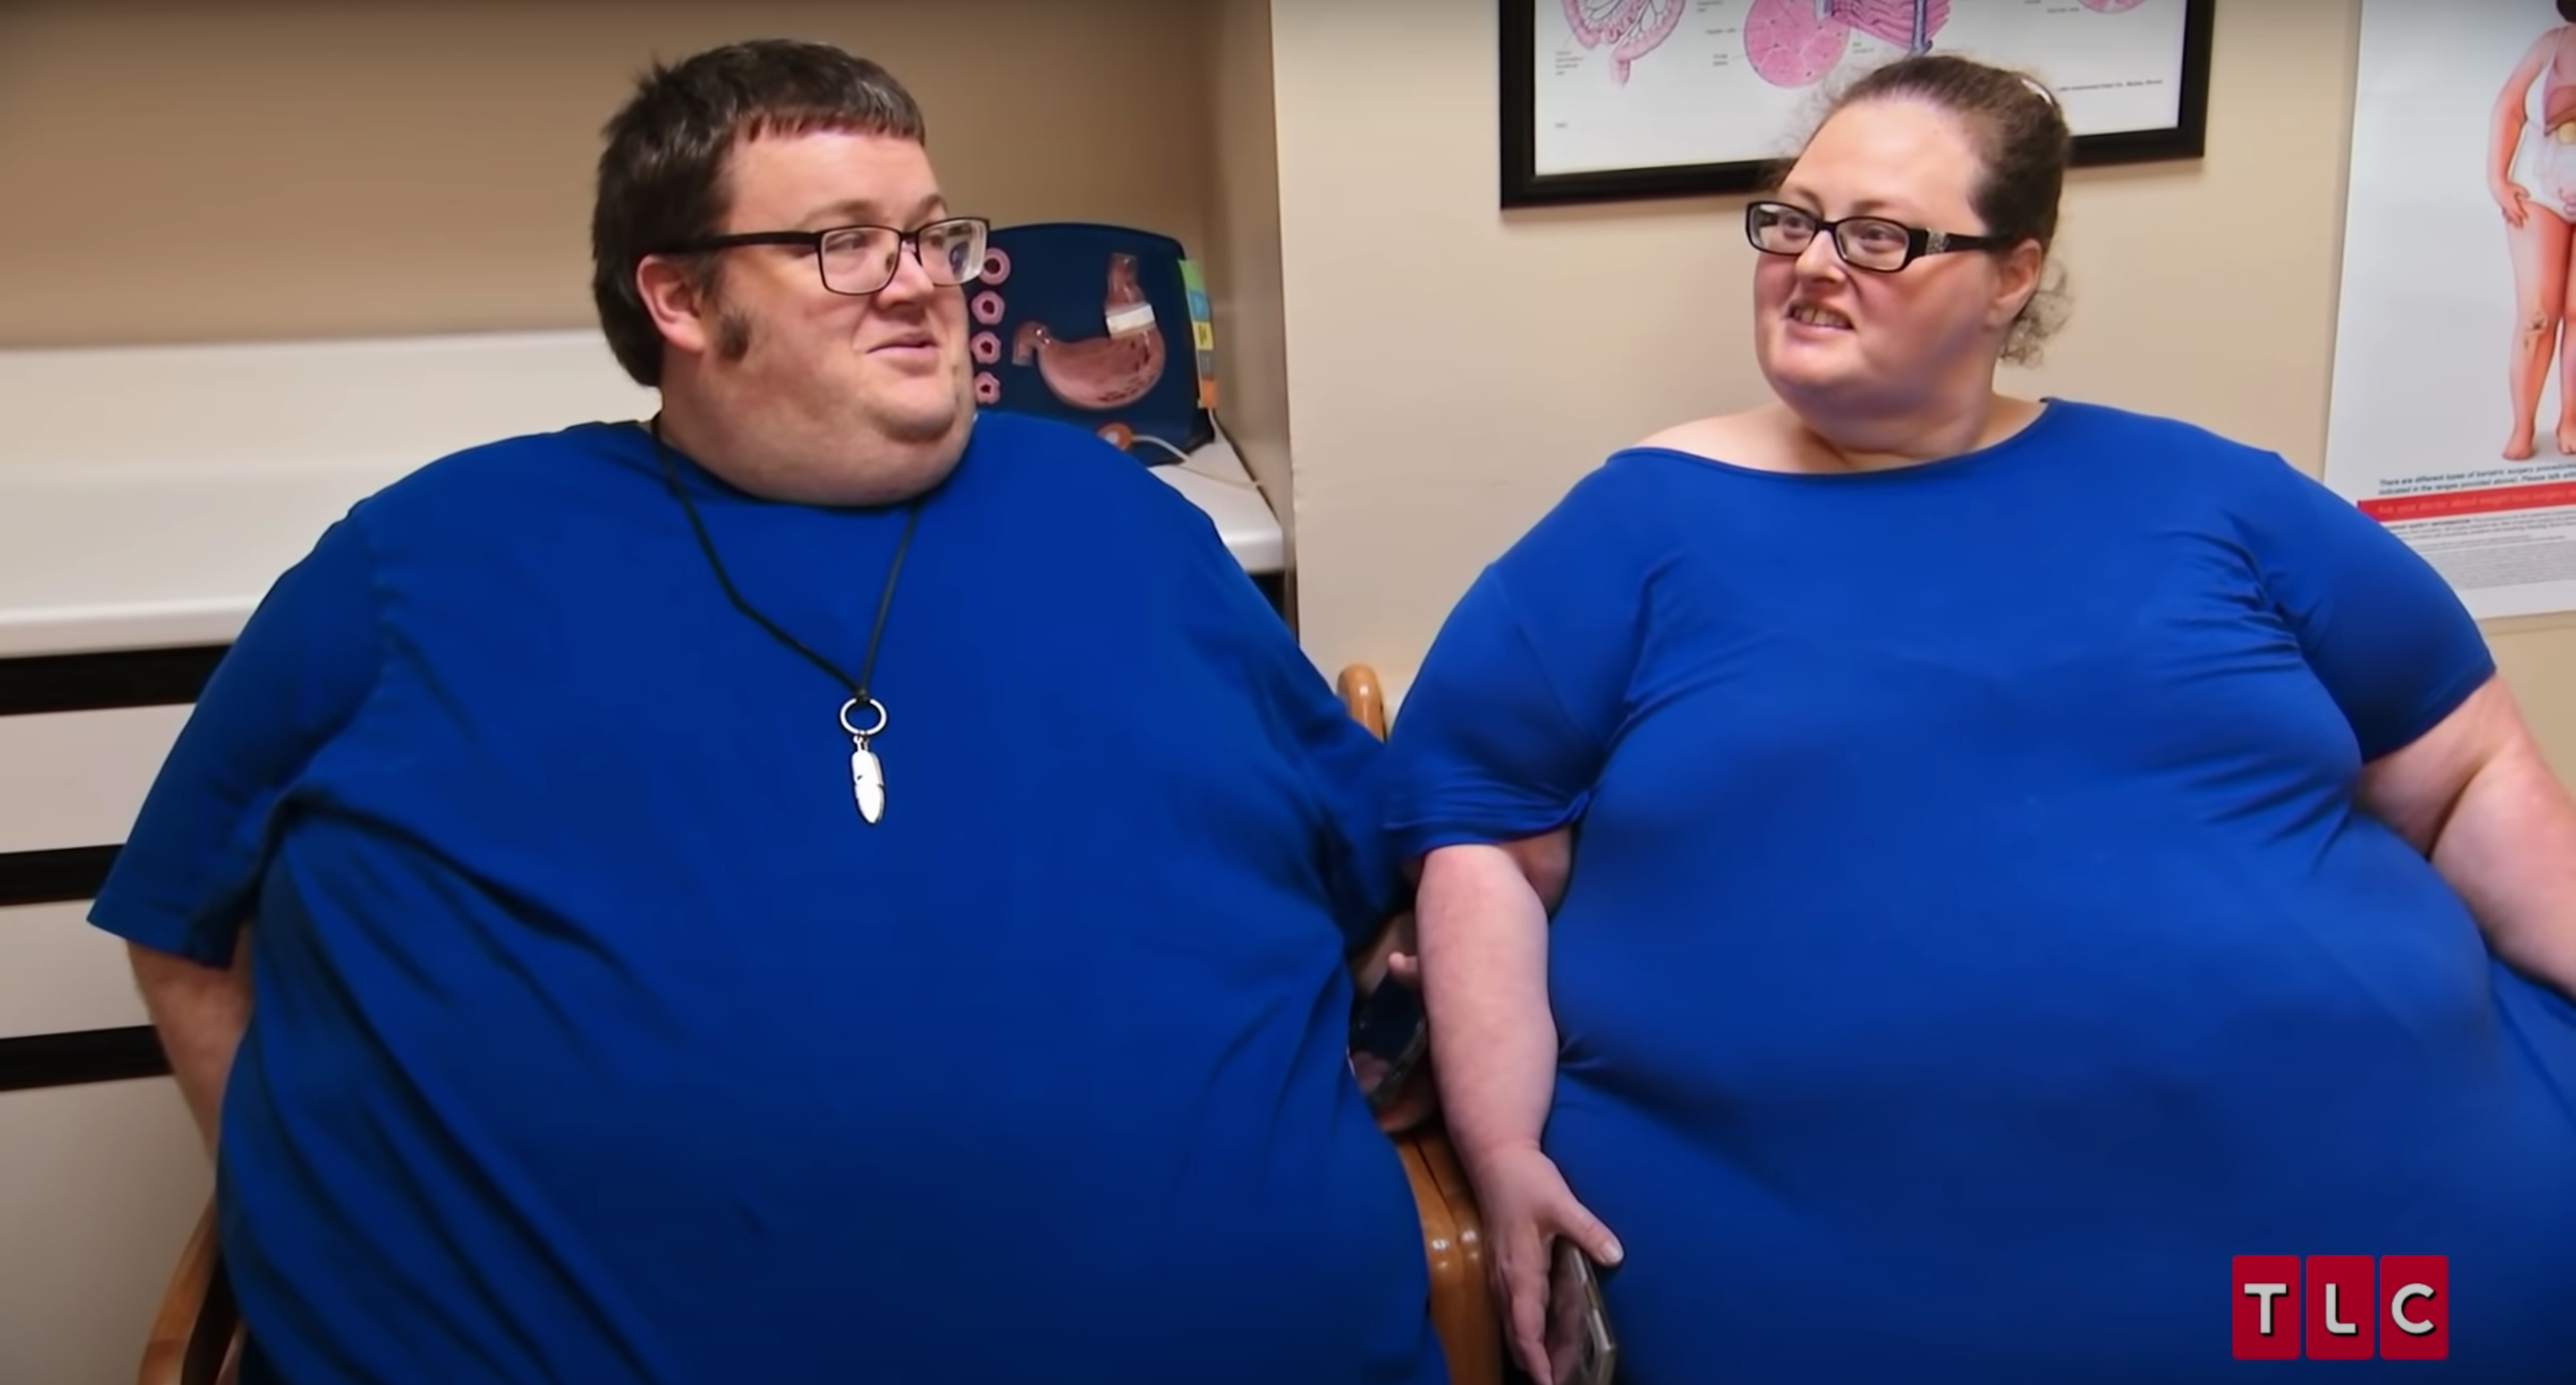 My 600-lb Life' Season 10 premiere: How to watch and stream for free.